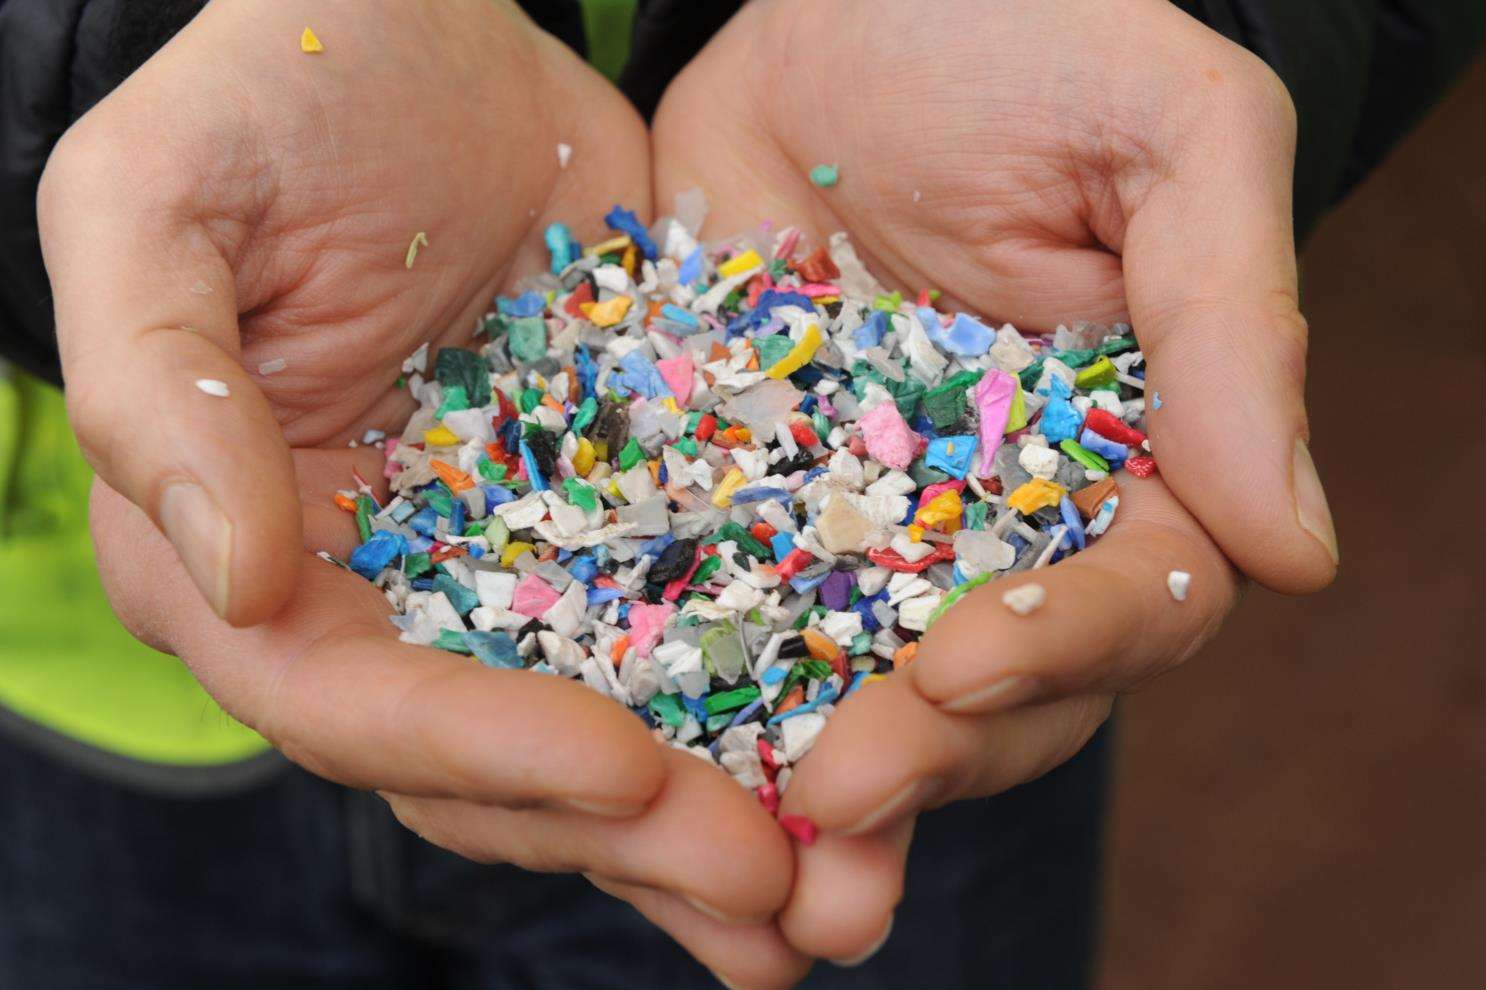 The finished granules of plastic